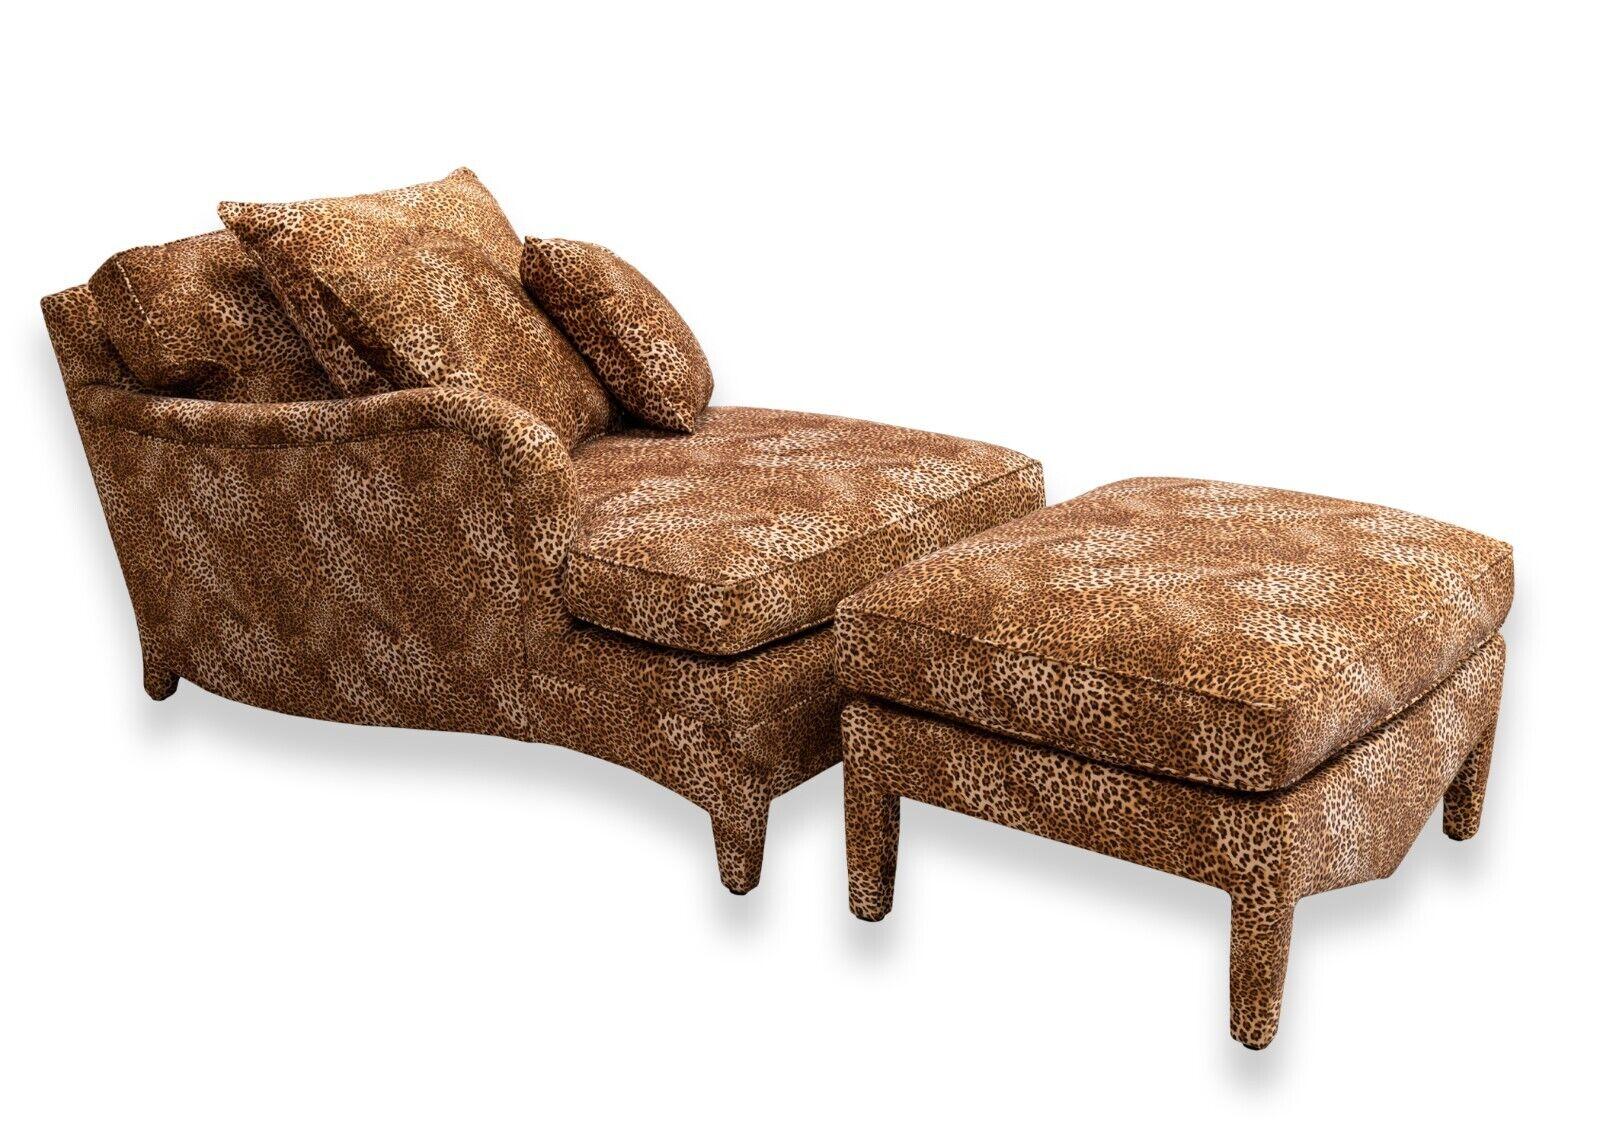 Fabric Pair of Donghia Leopard Print Left and Right Hand Chaise with Matching Ottomans